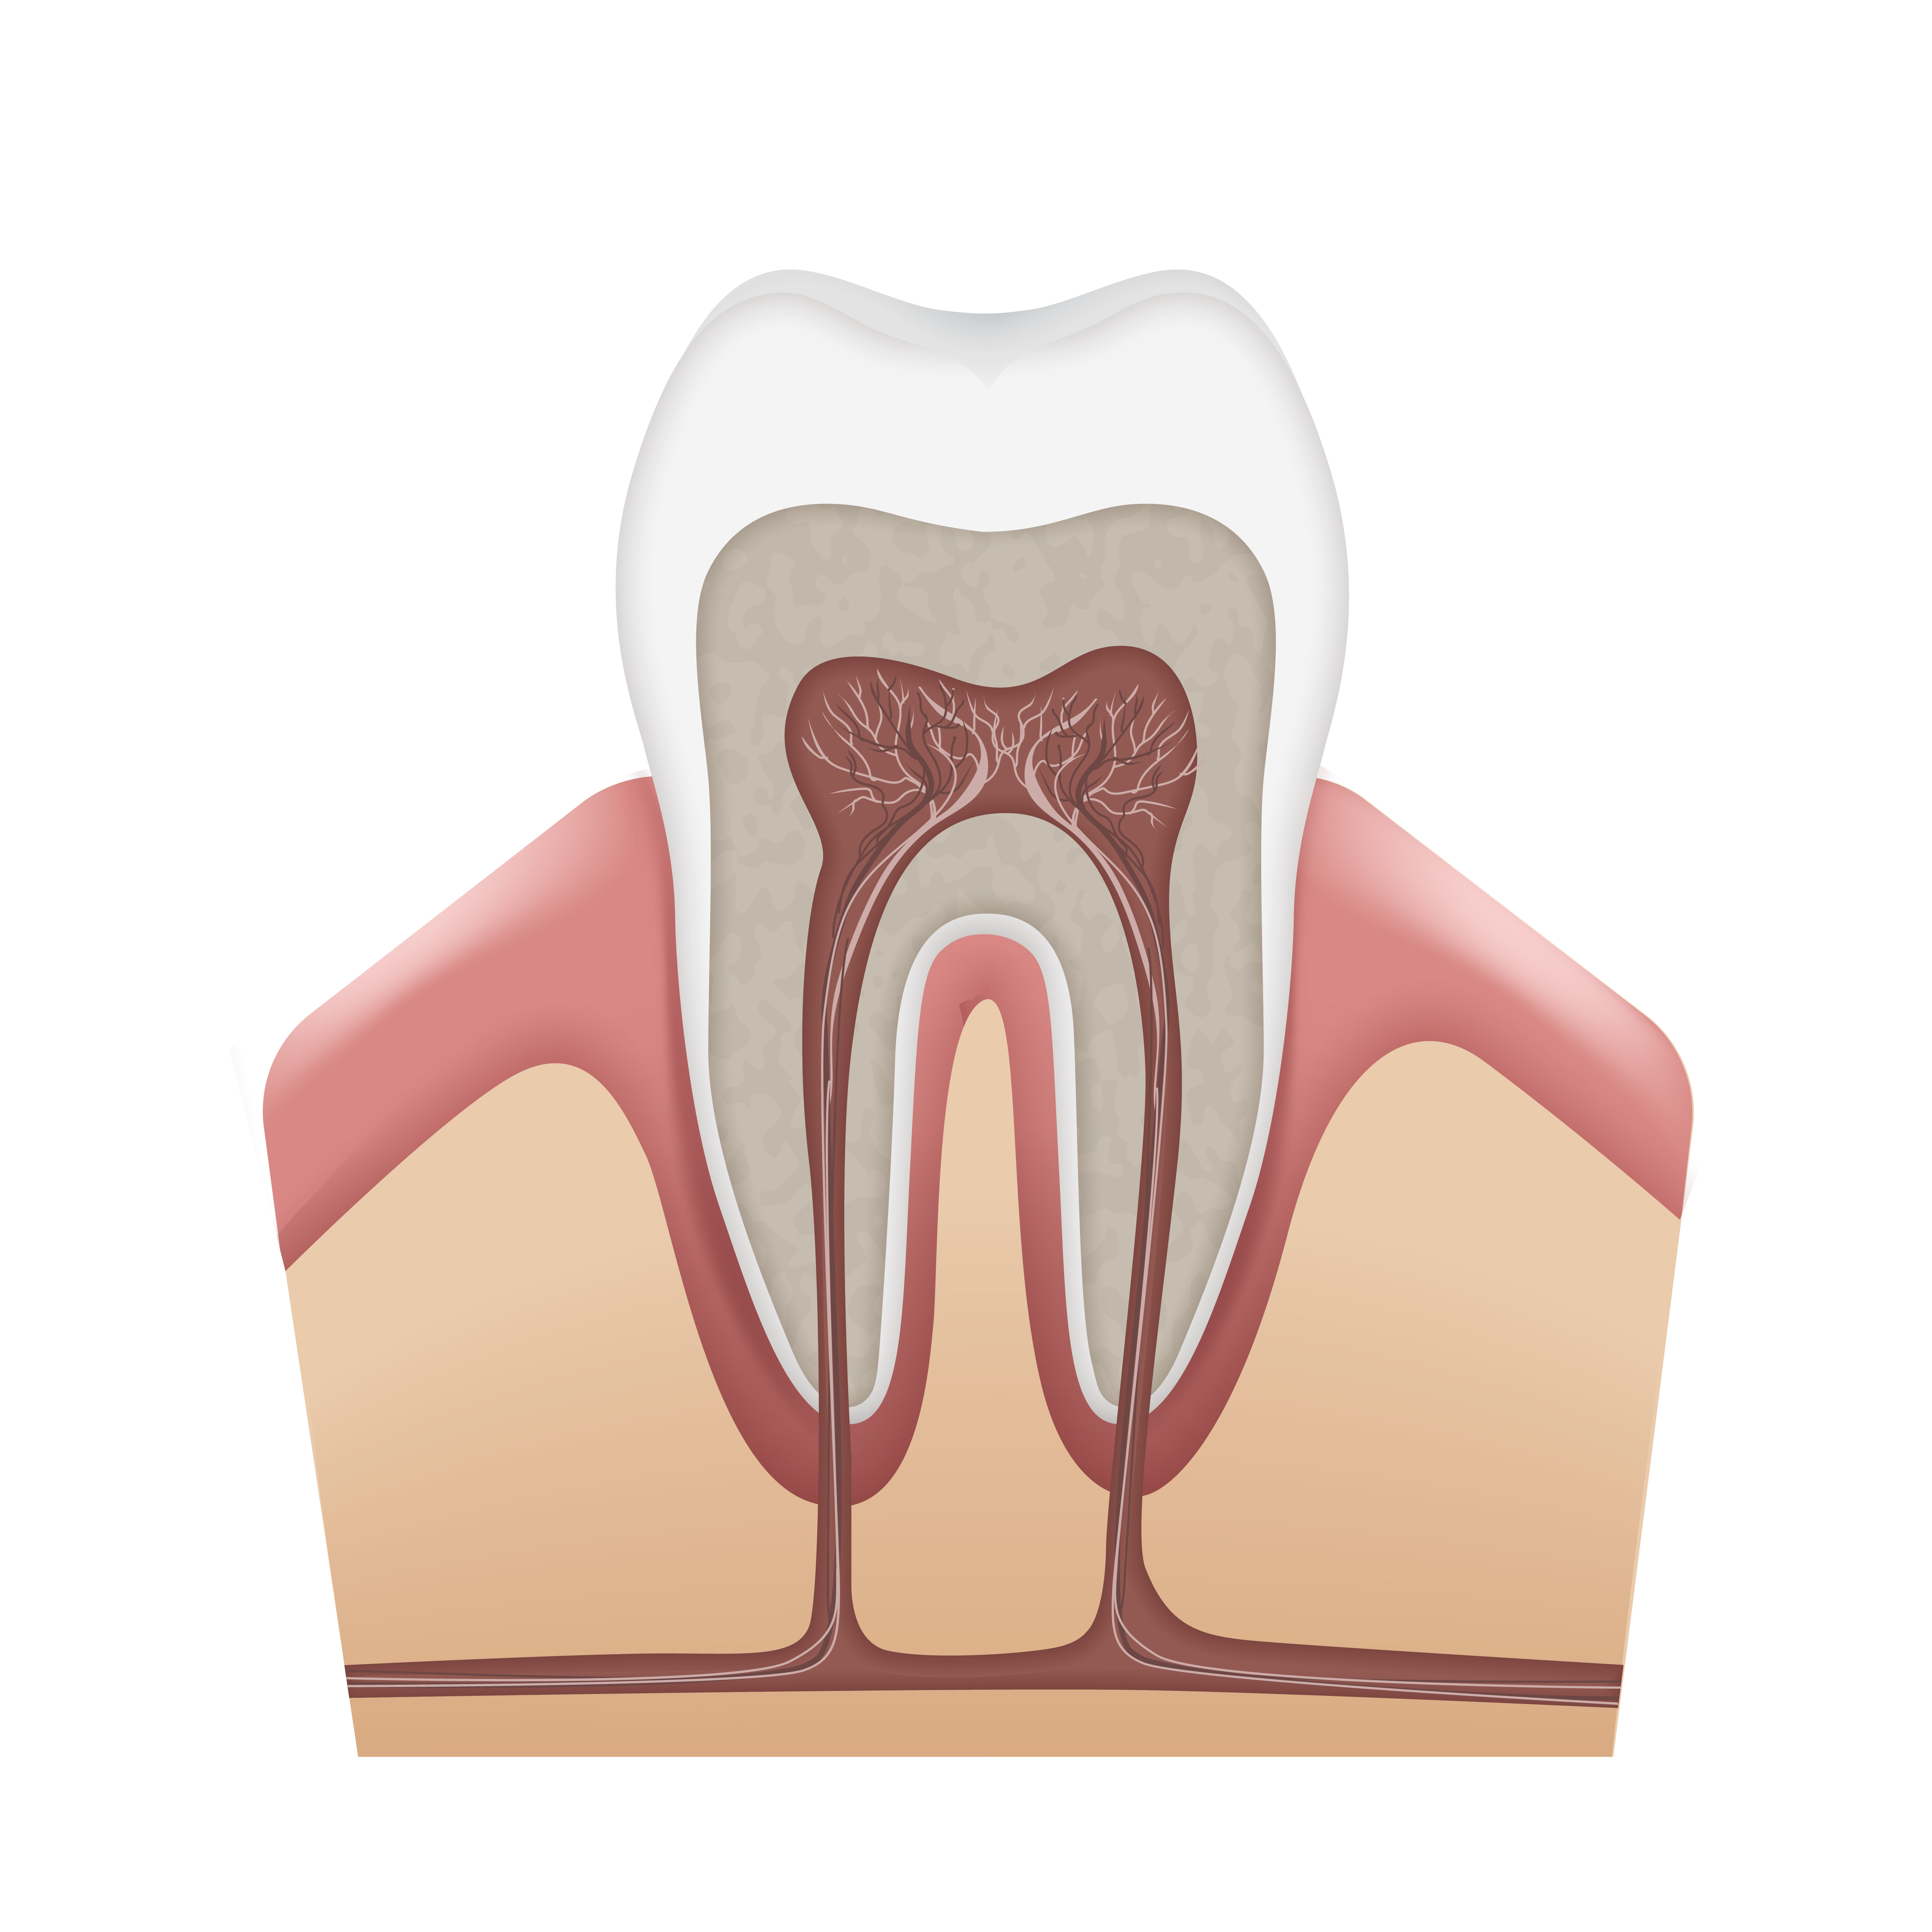 root canal treatment cost in chennai